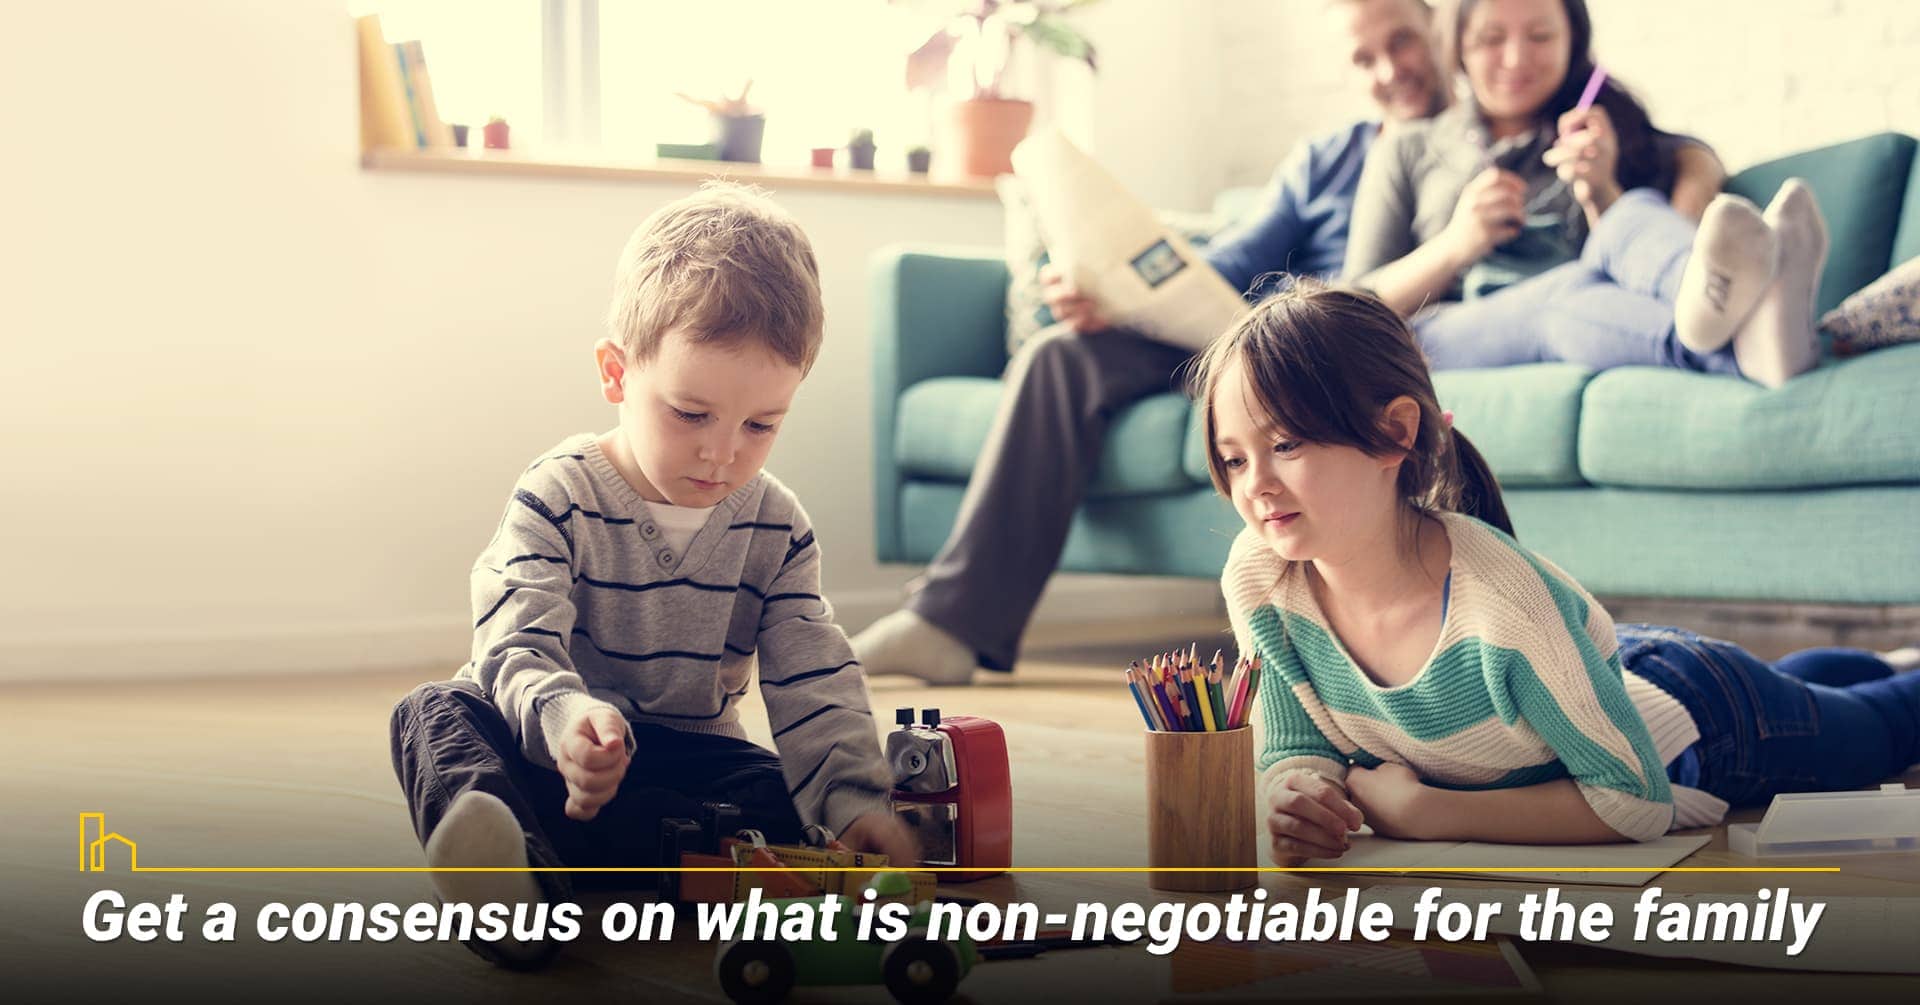 Get a consensus on what is non-negotiable for the family, set rules as a family